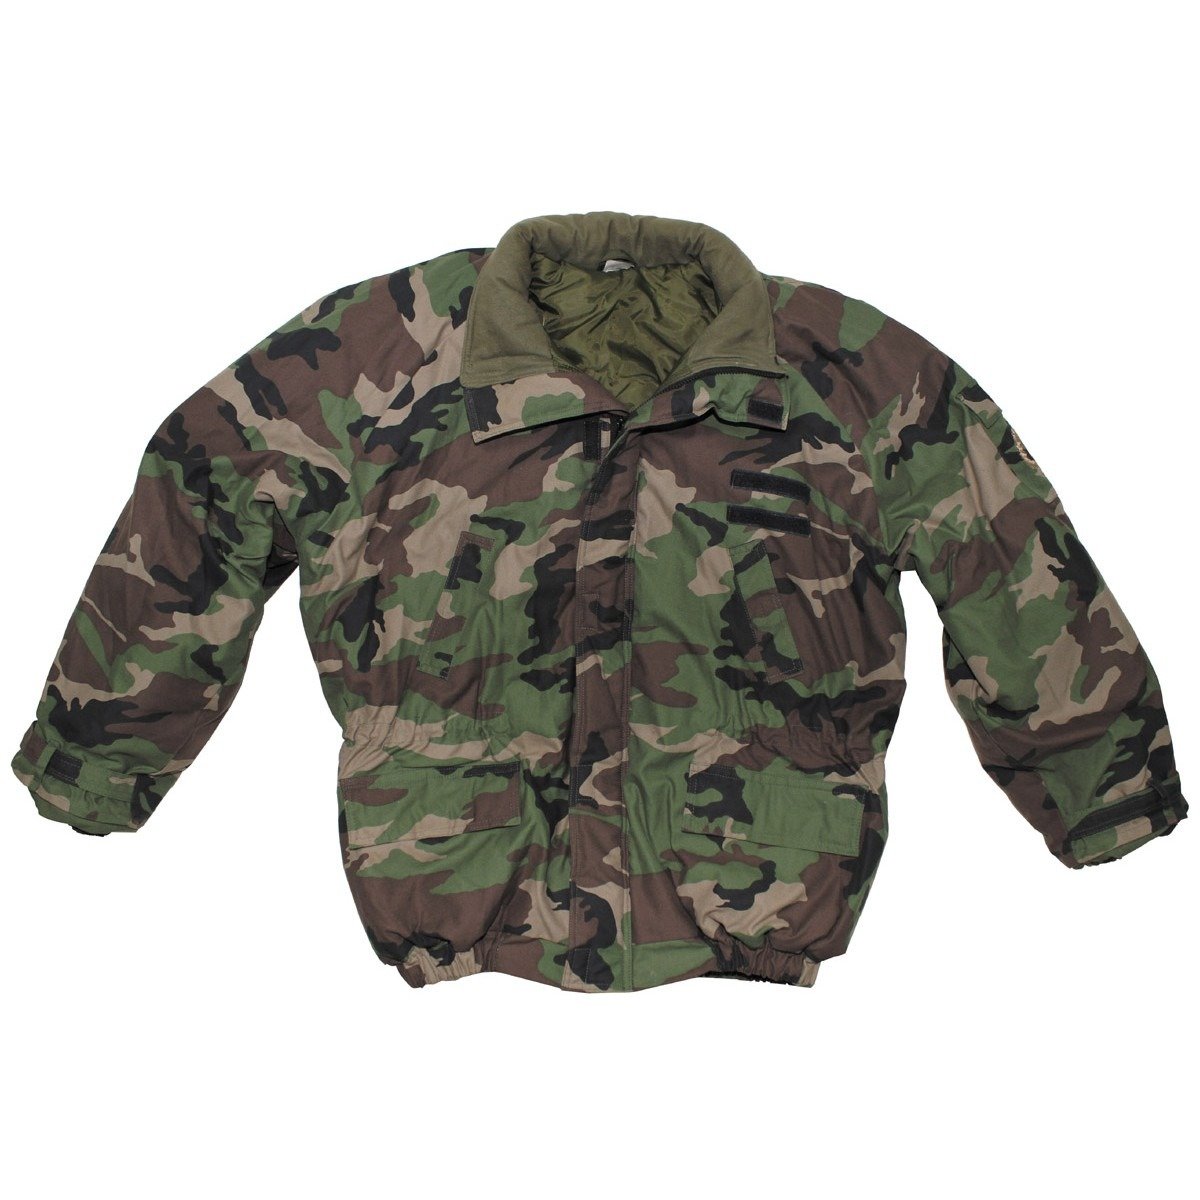 SK jacket, winter, M 97 camo, used | Military Surplus \ Used Clothing ...